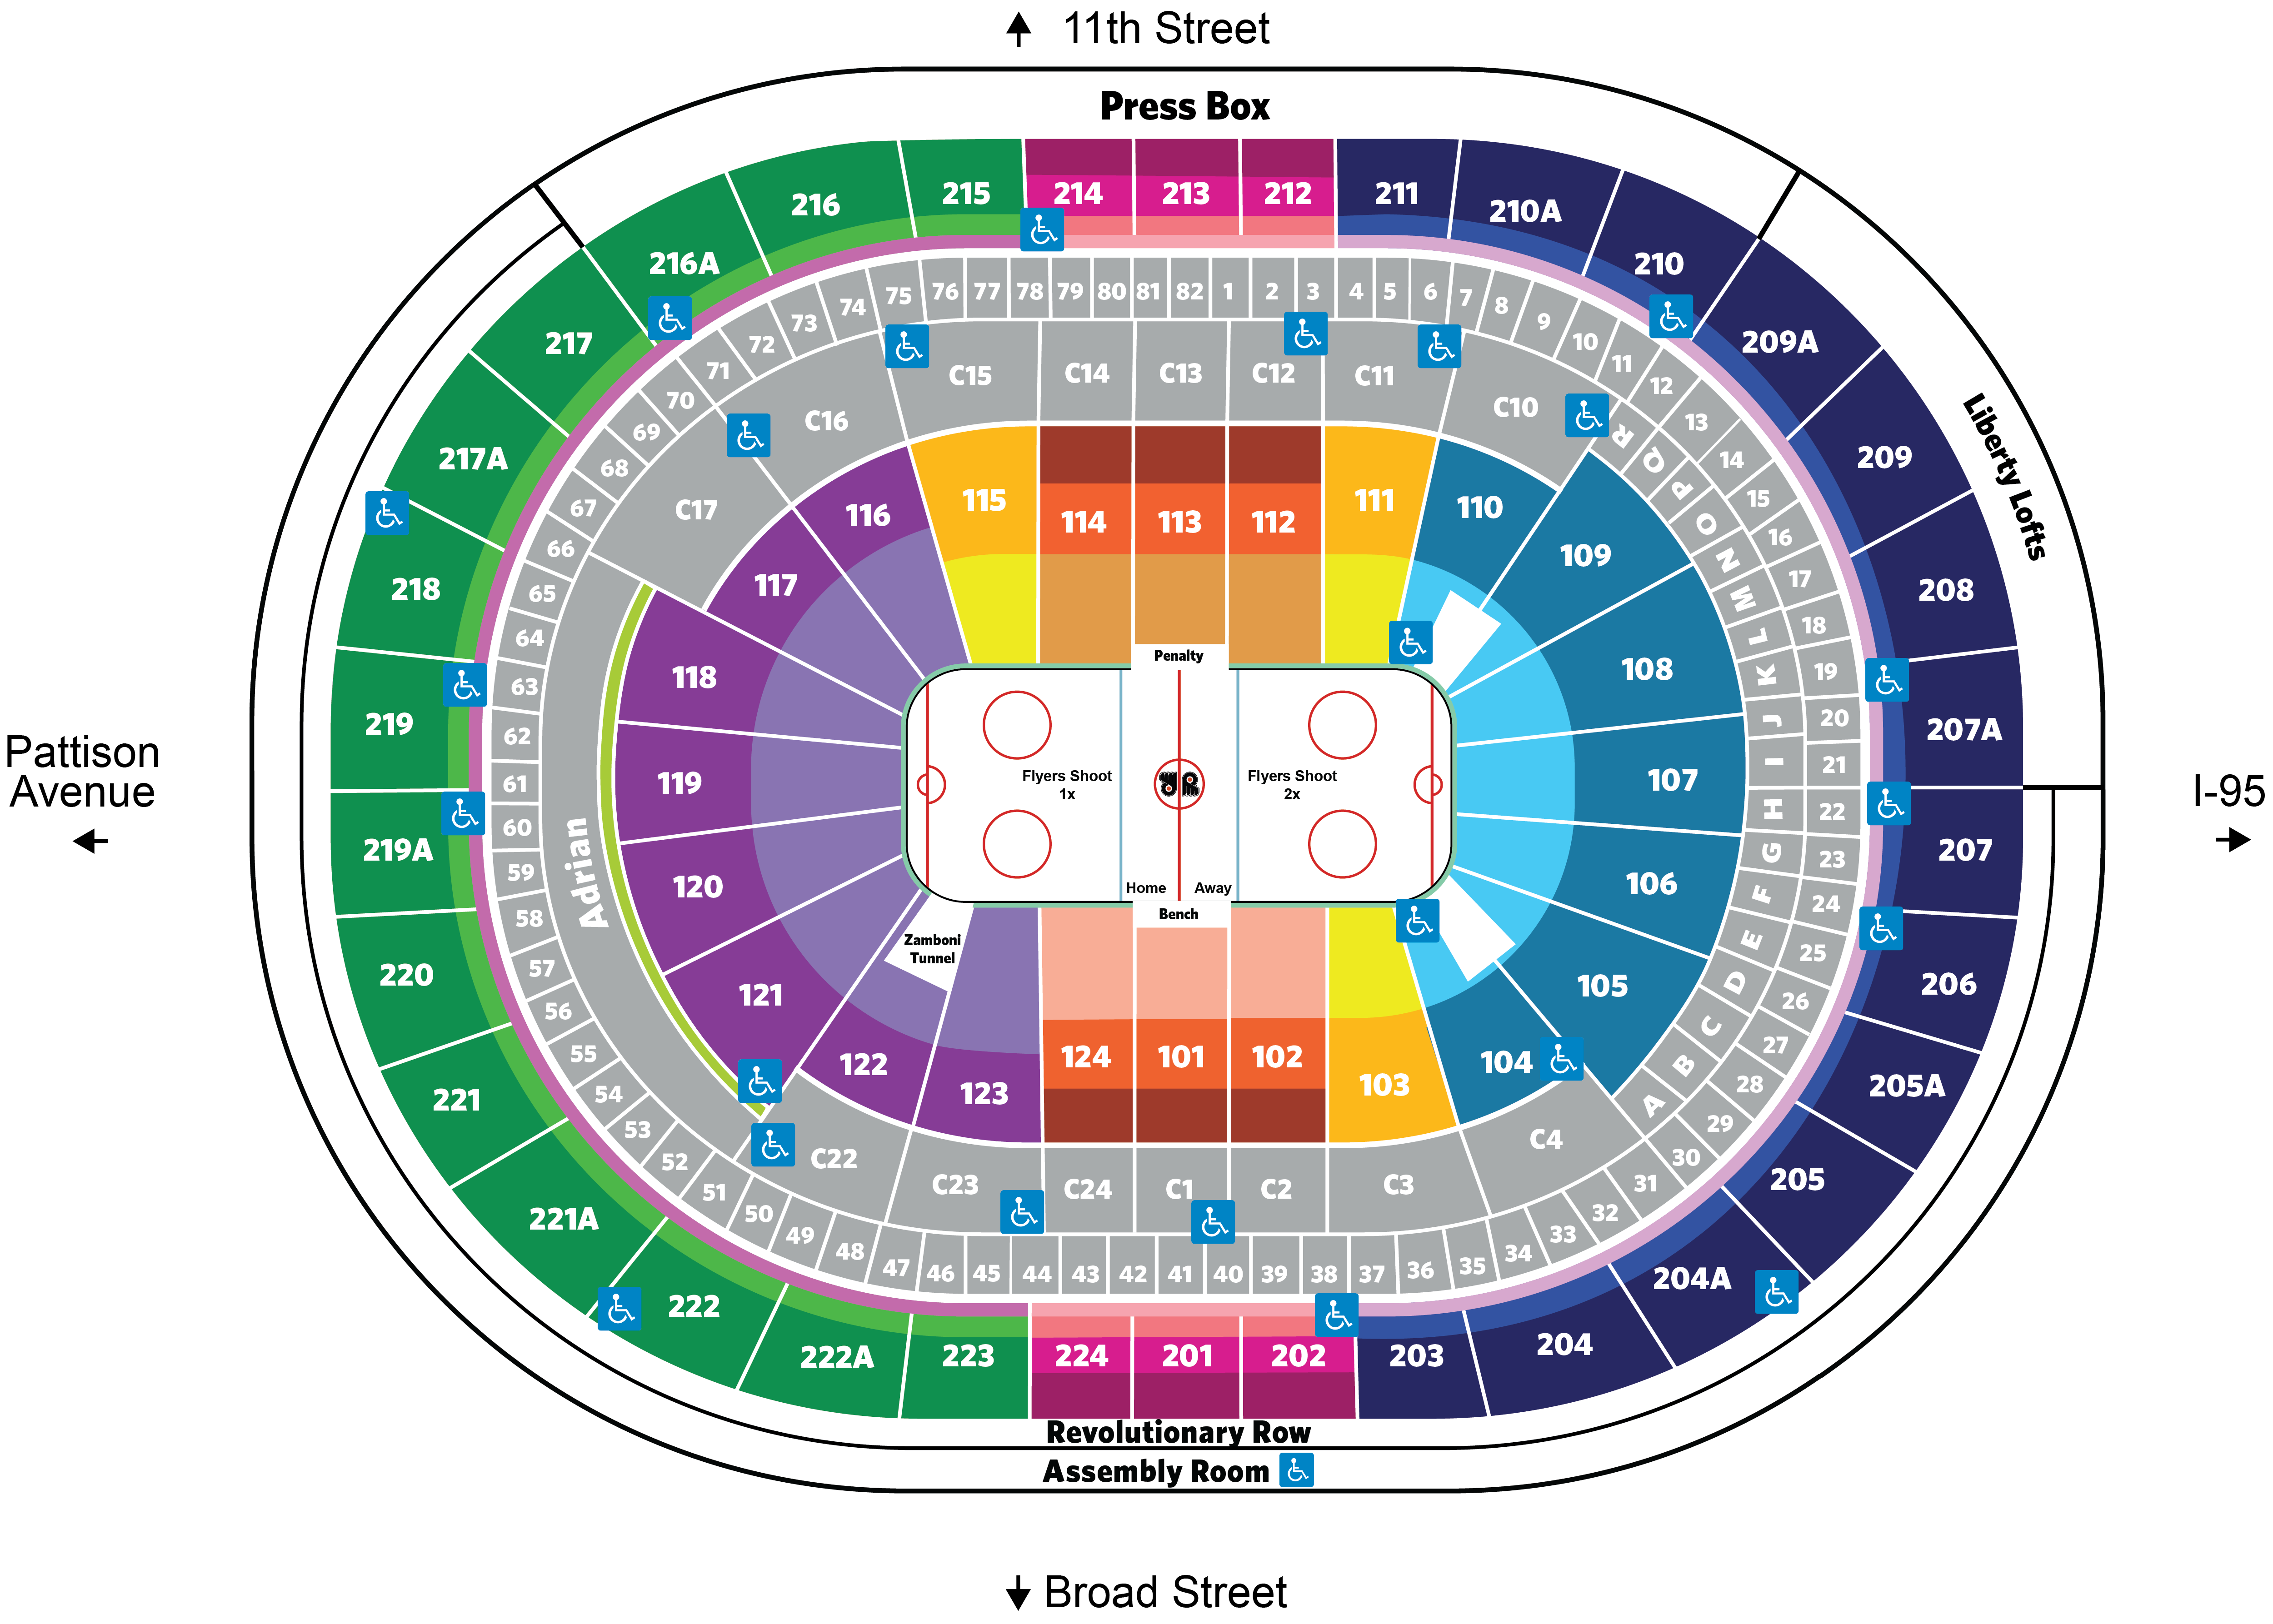 Section 212 at Wells Fargo Center 